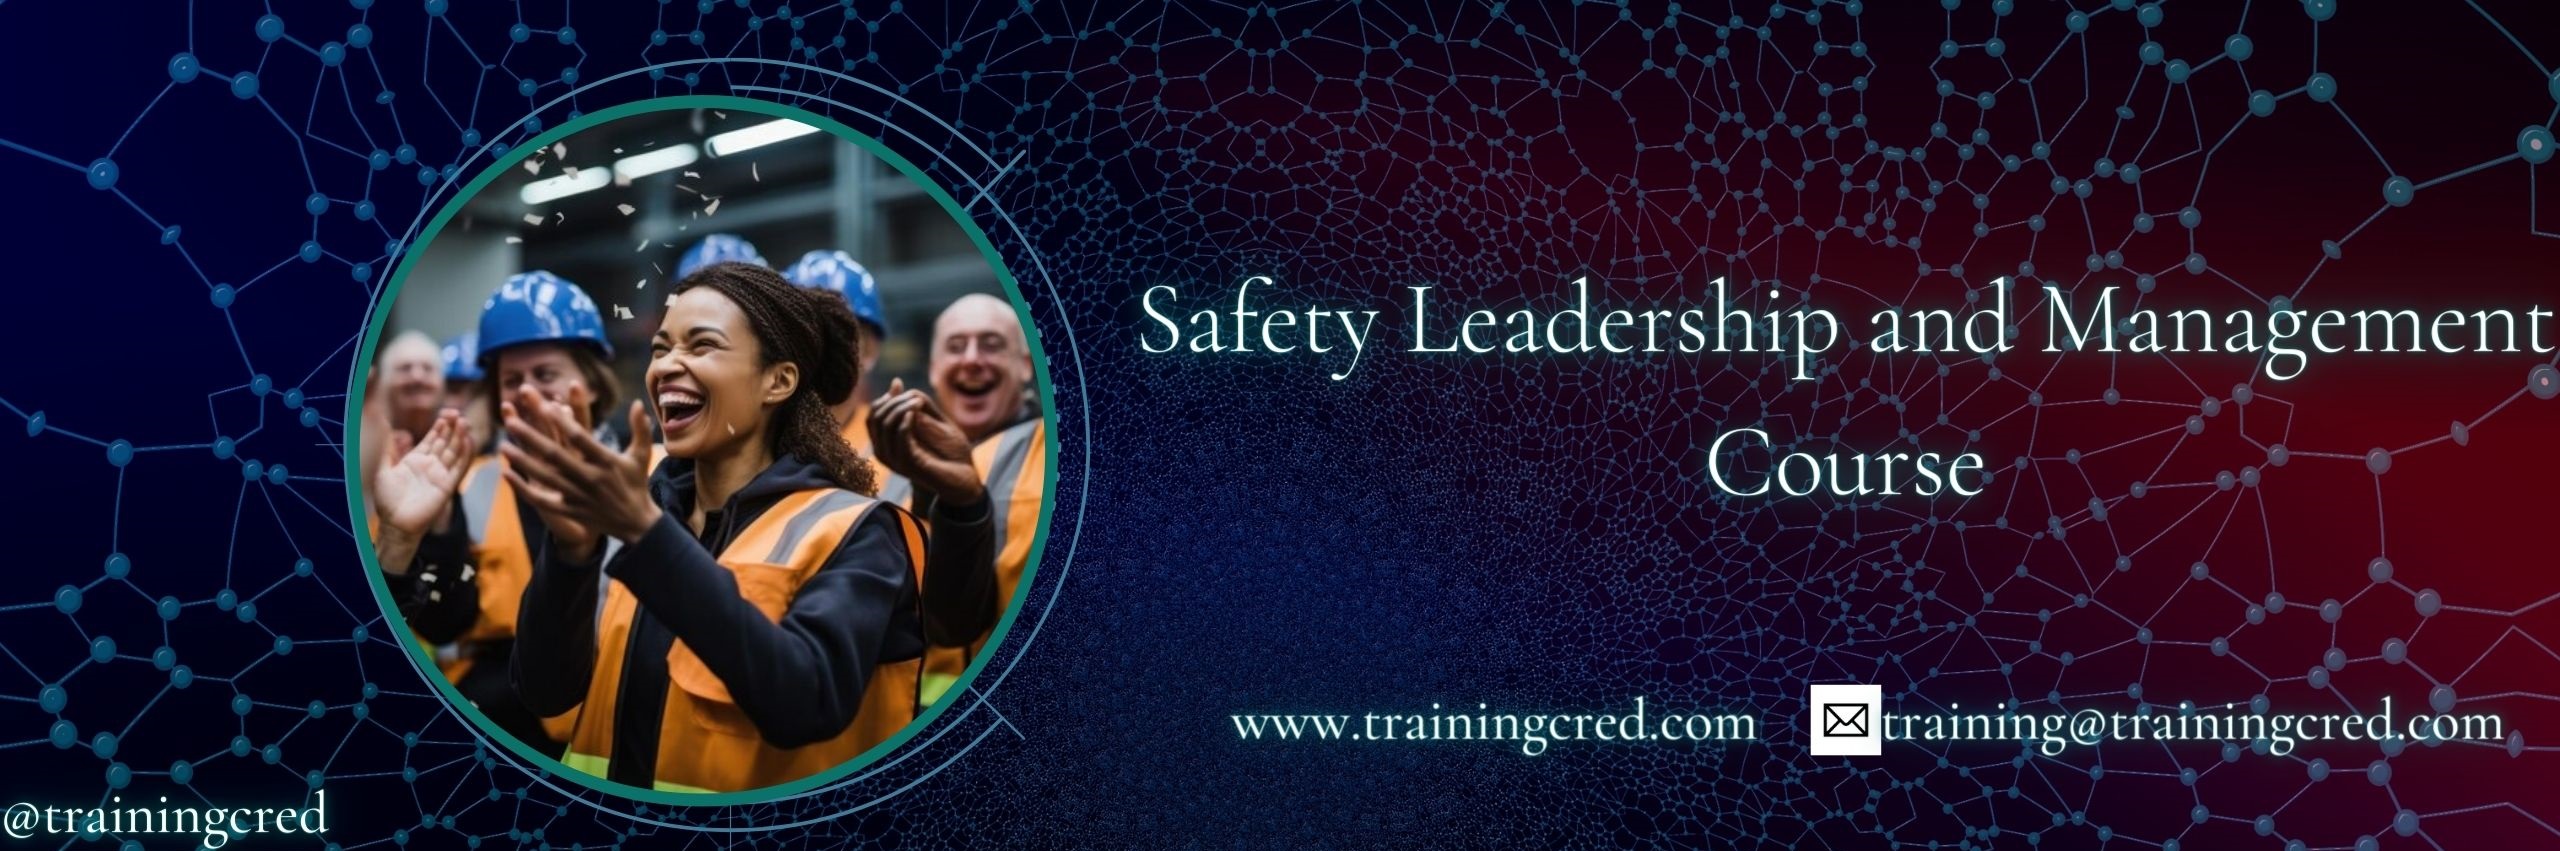 Safety Leadership and Management Training